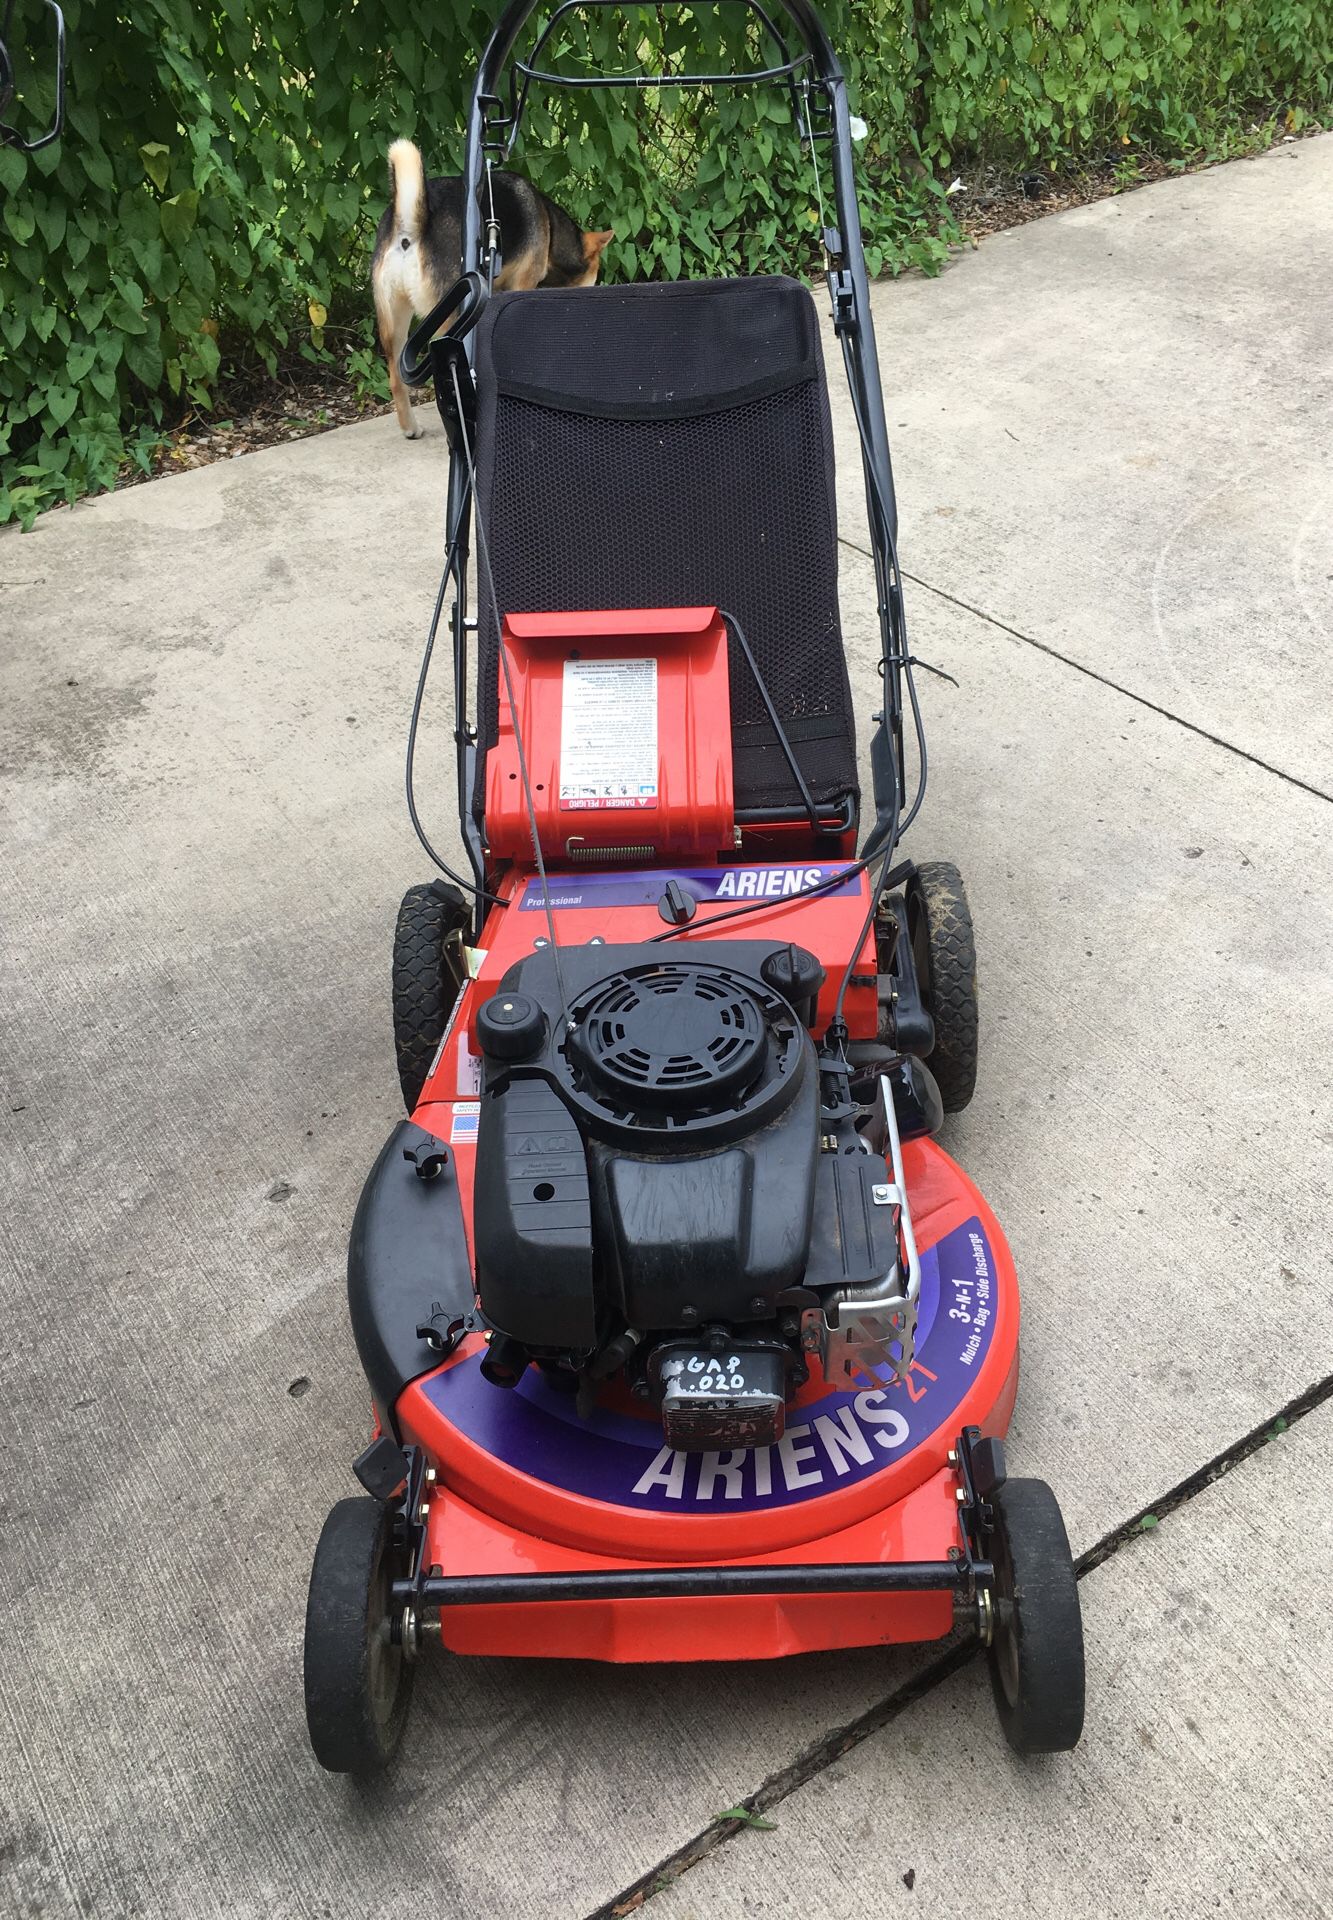 Ariens self propelled commercial lawn mower